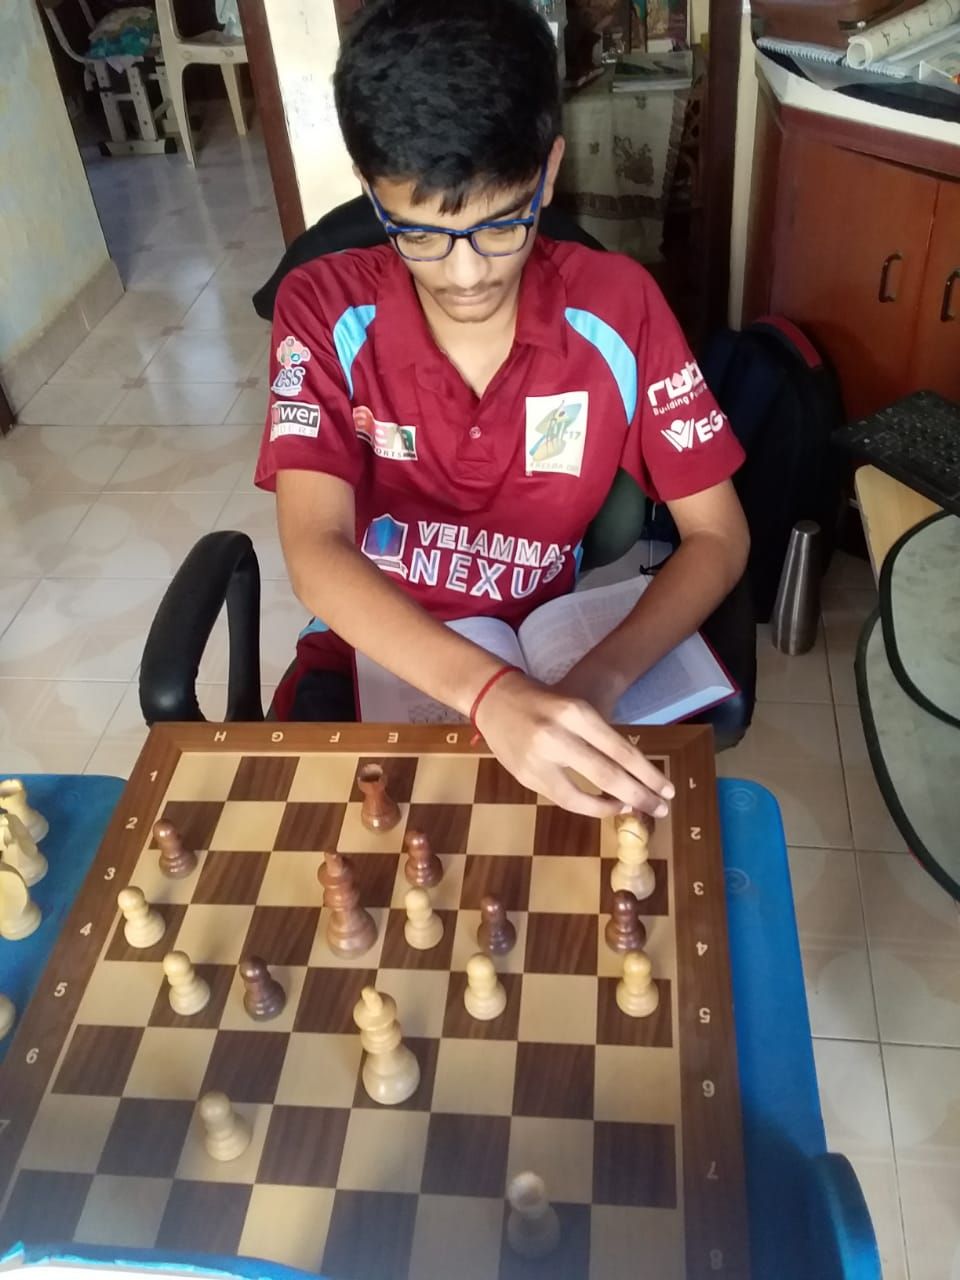 GM Gukesh ends 2020 on a high